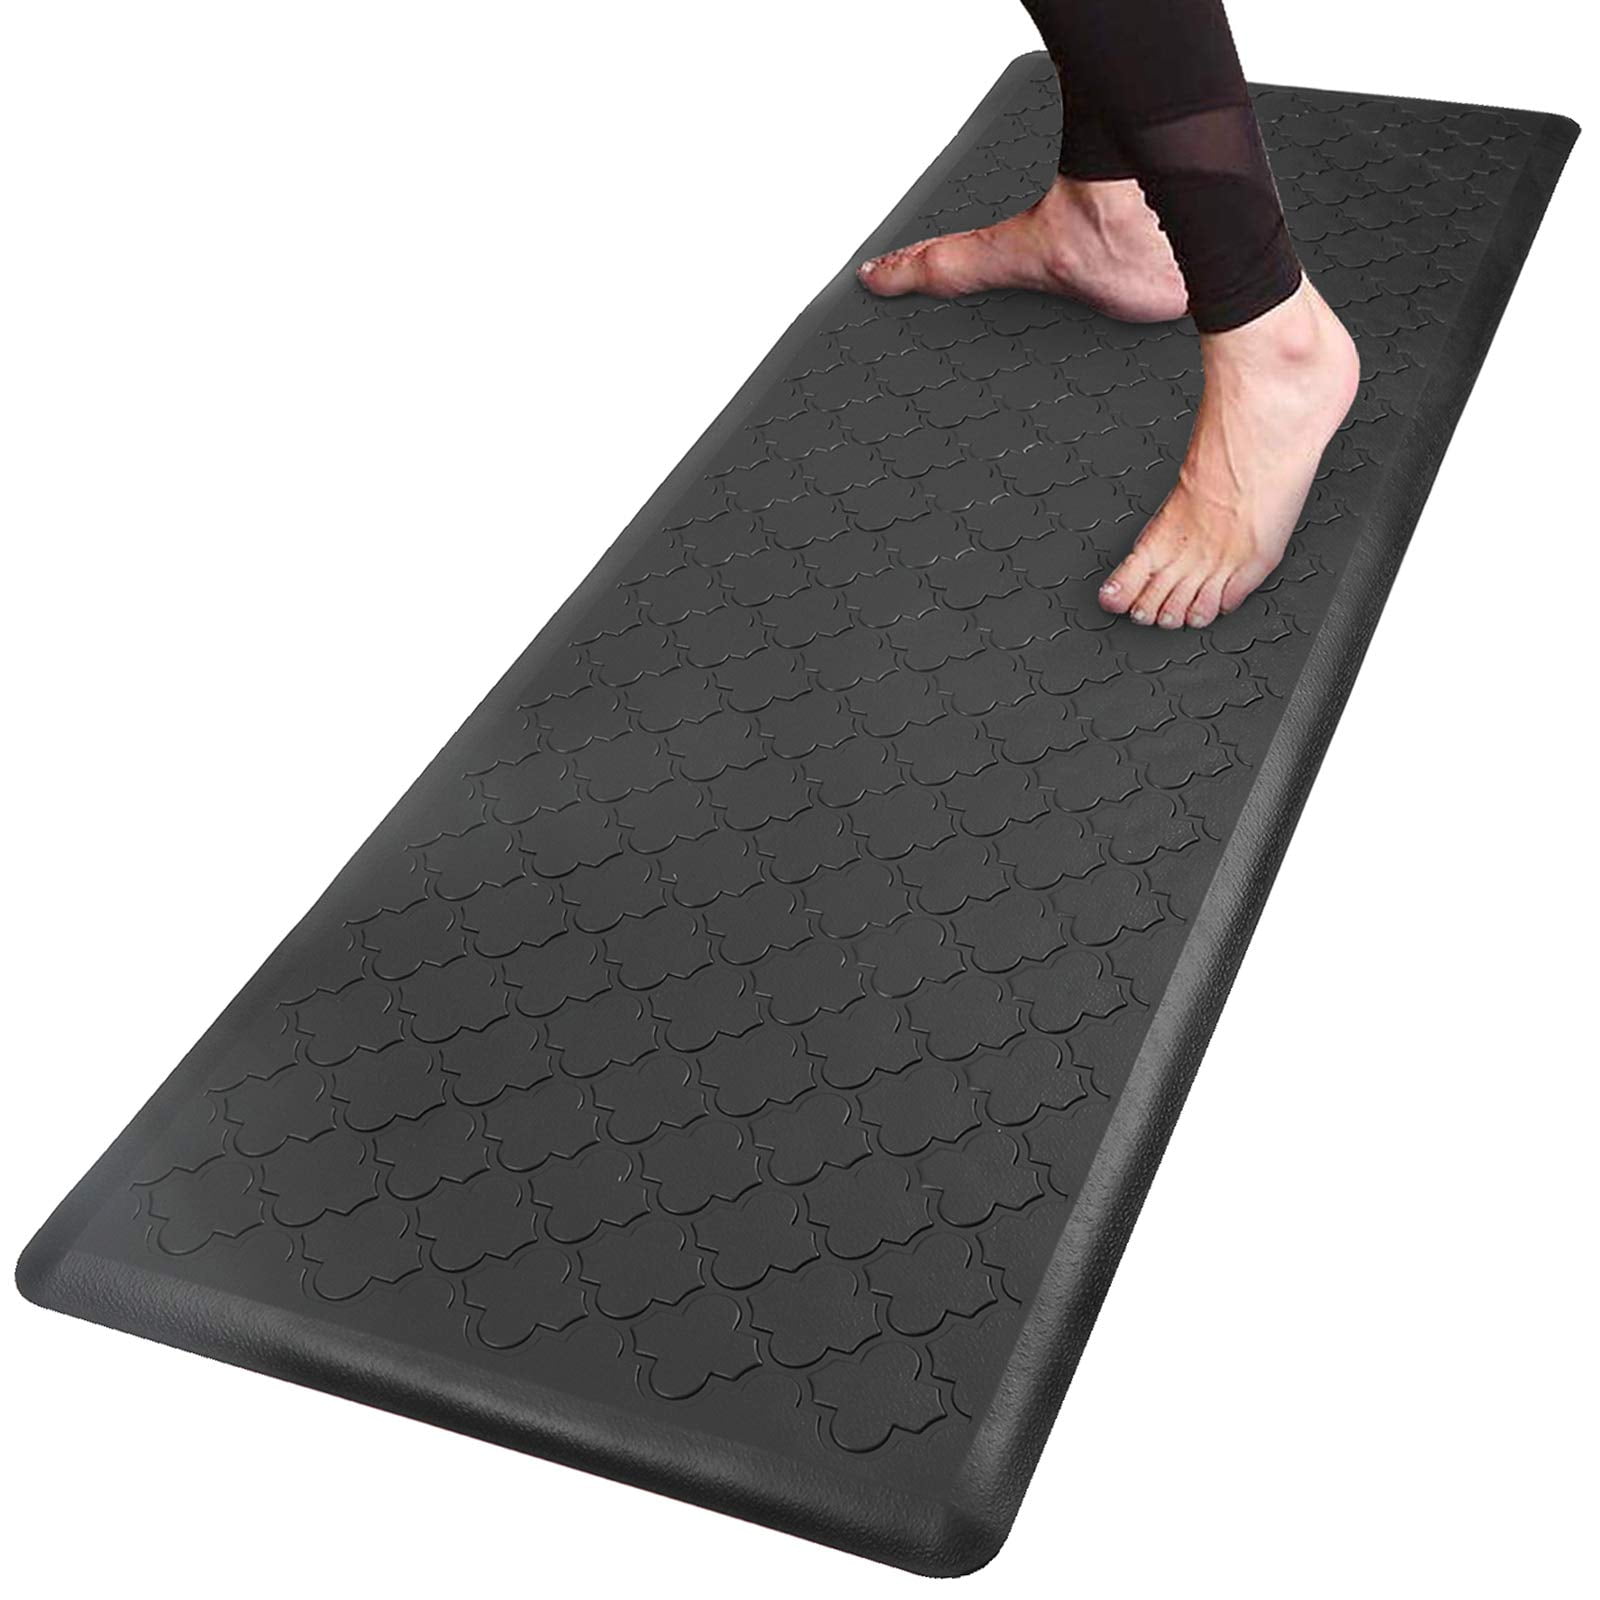 Simple Best Anti Fatigue Mat For Standing Desk Australia with Wall Mounted Monitor